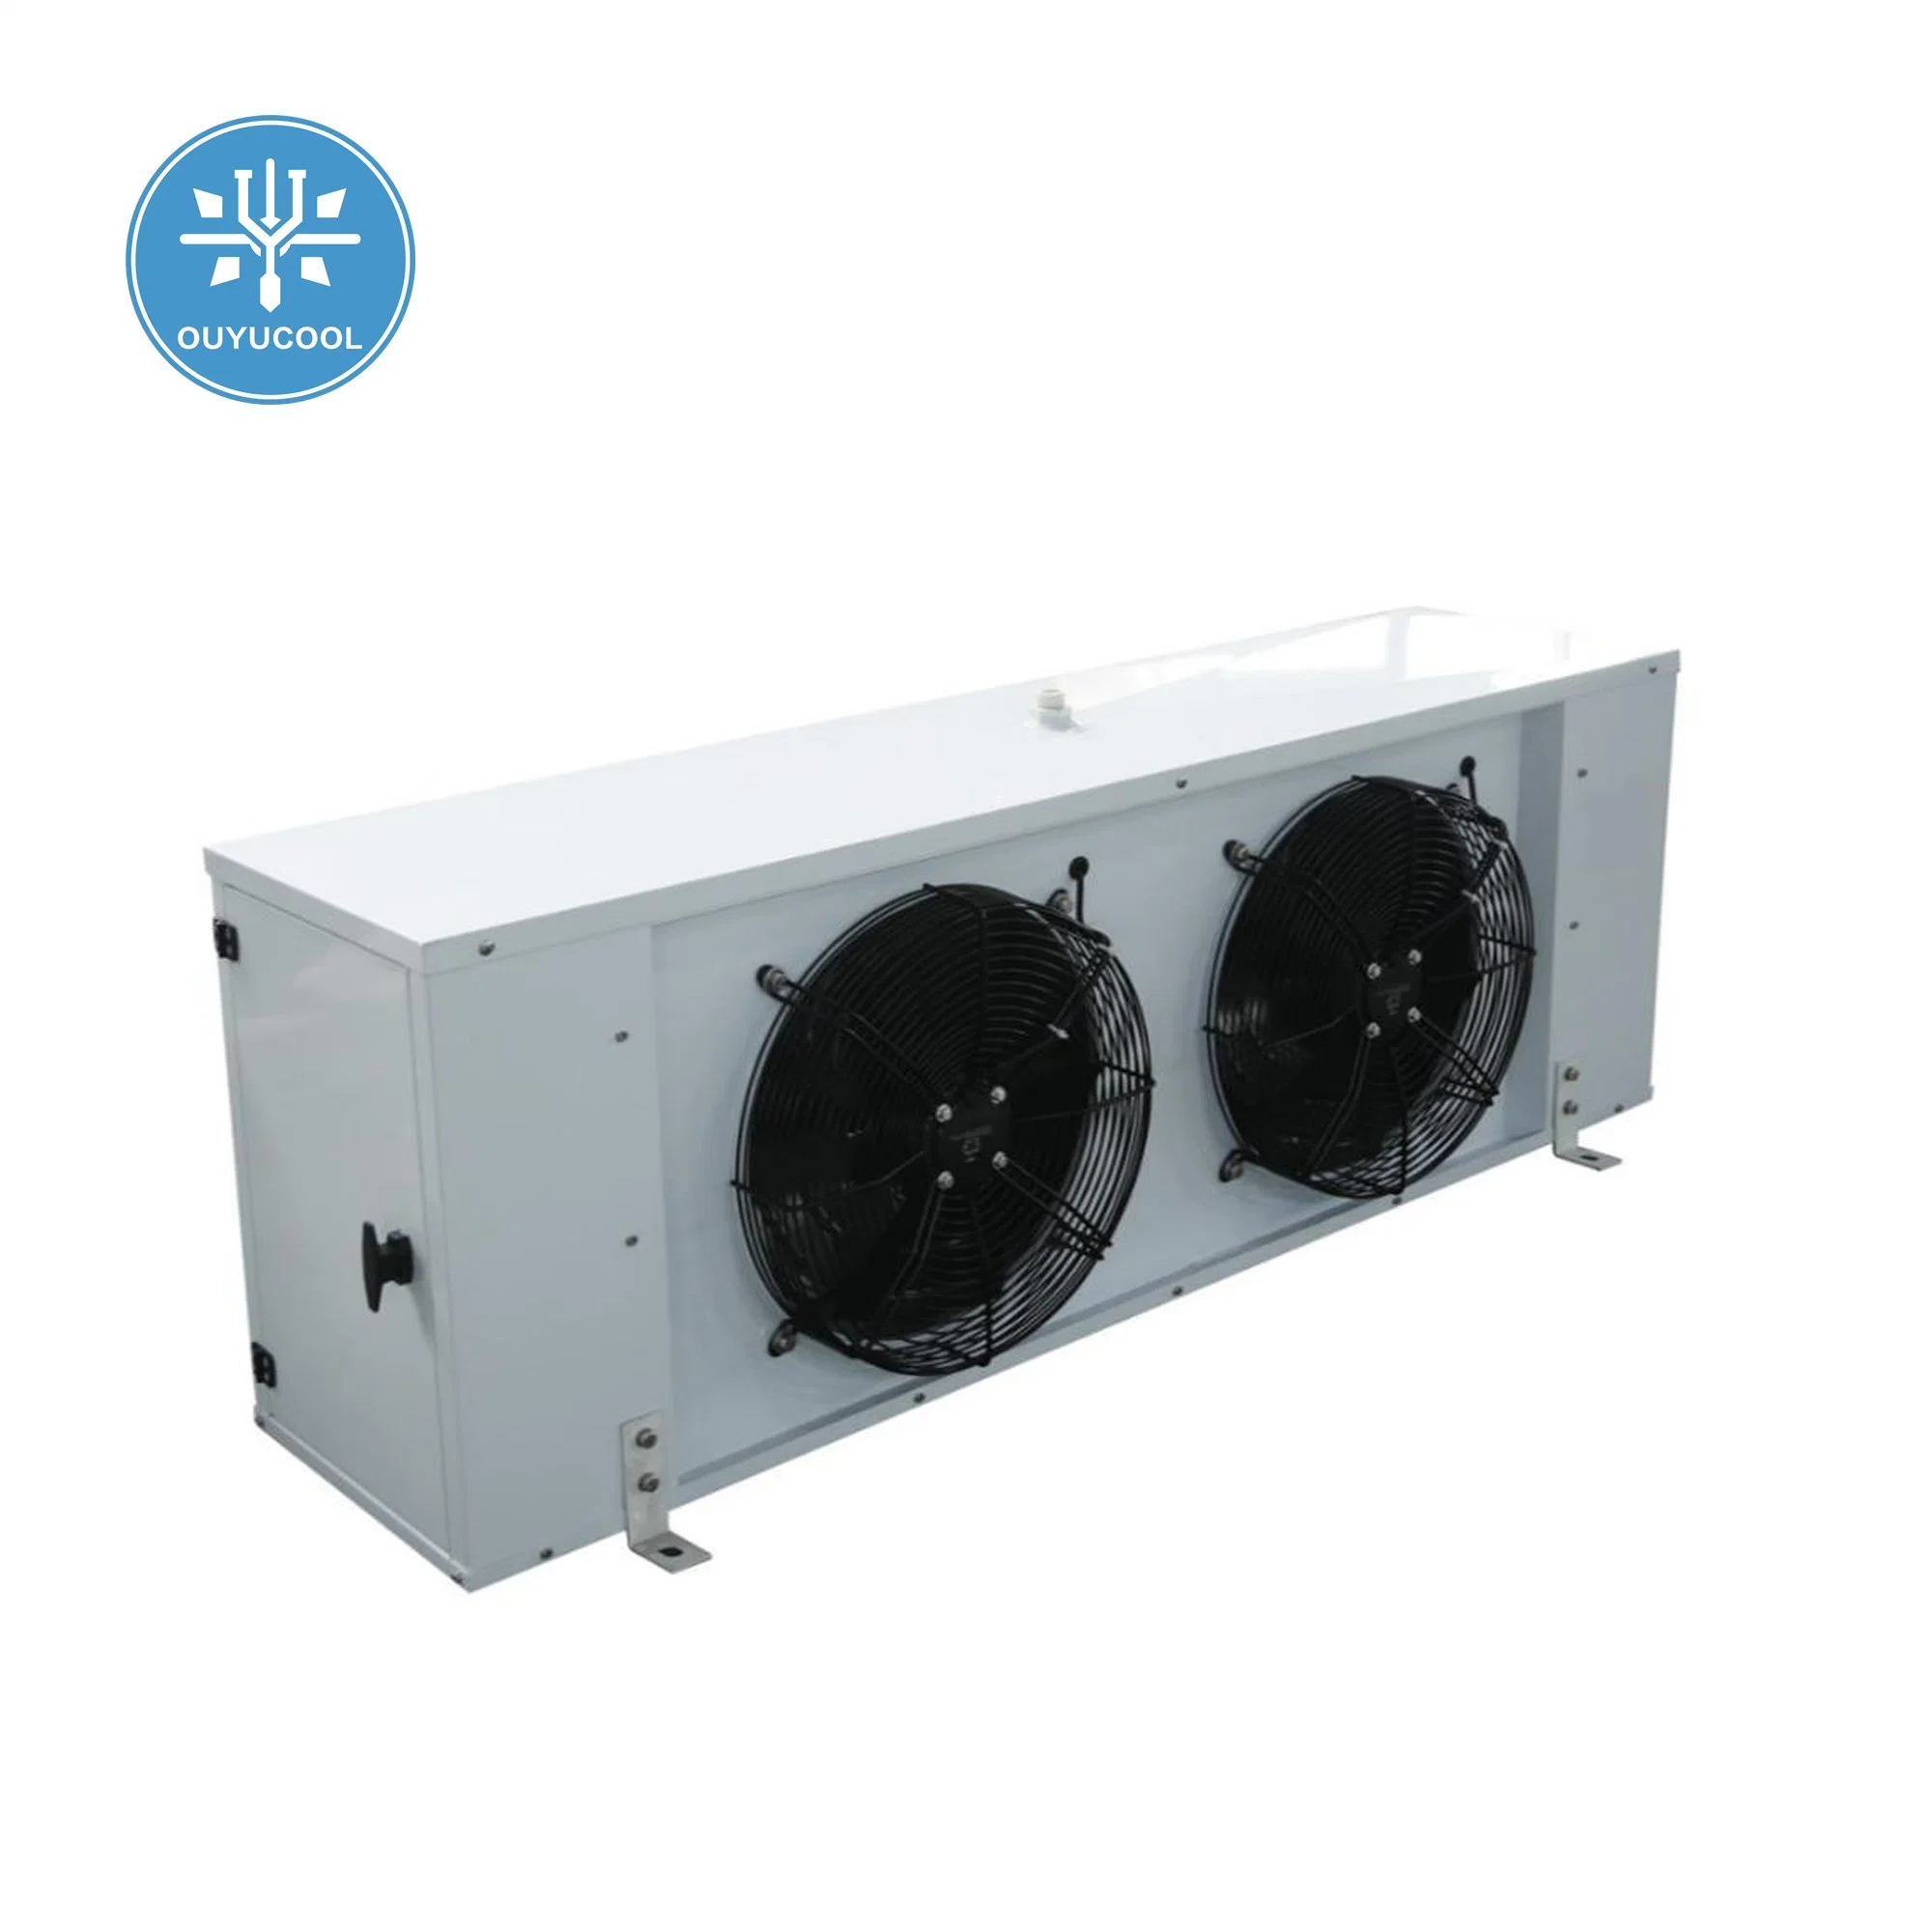 Factory Refrigeration Evaporator Air Cooler Provide OEM Service for Cold Room Cold Storage Condensing Unit Refrigeration Equipment